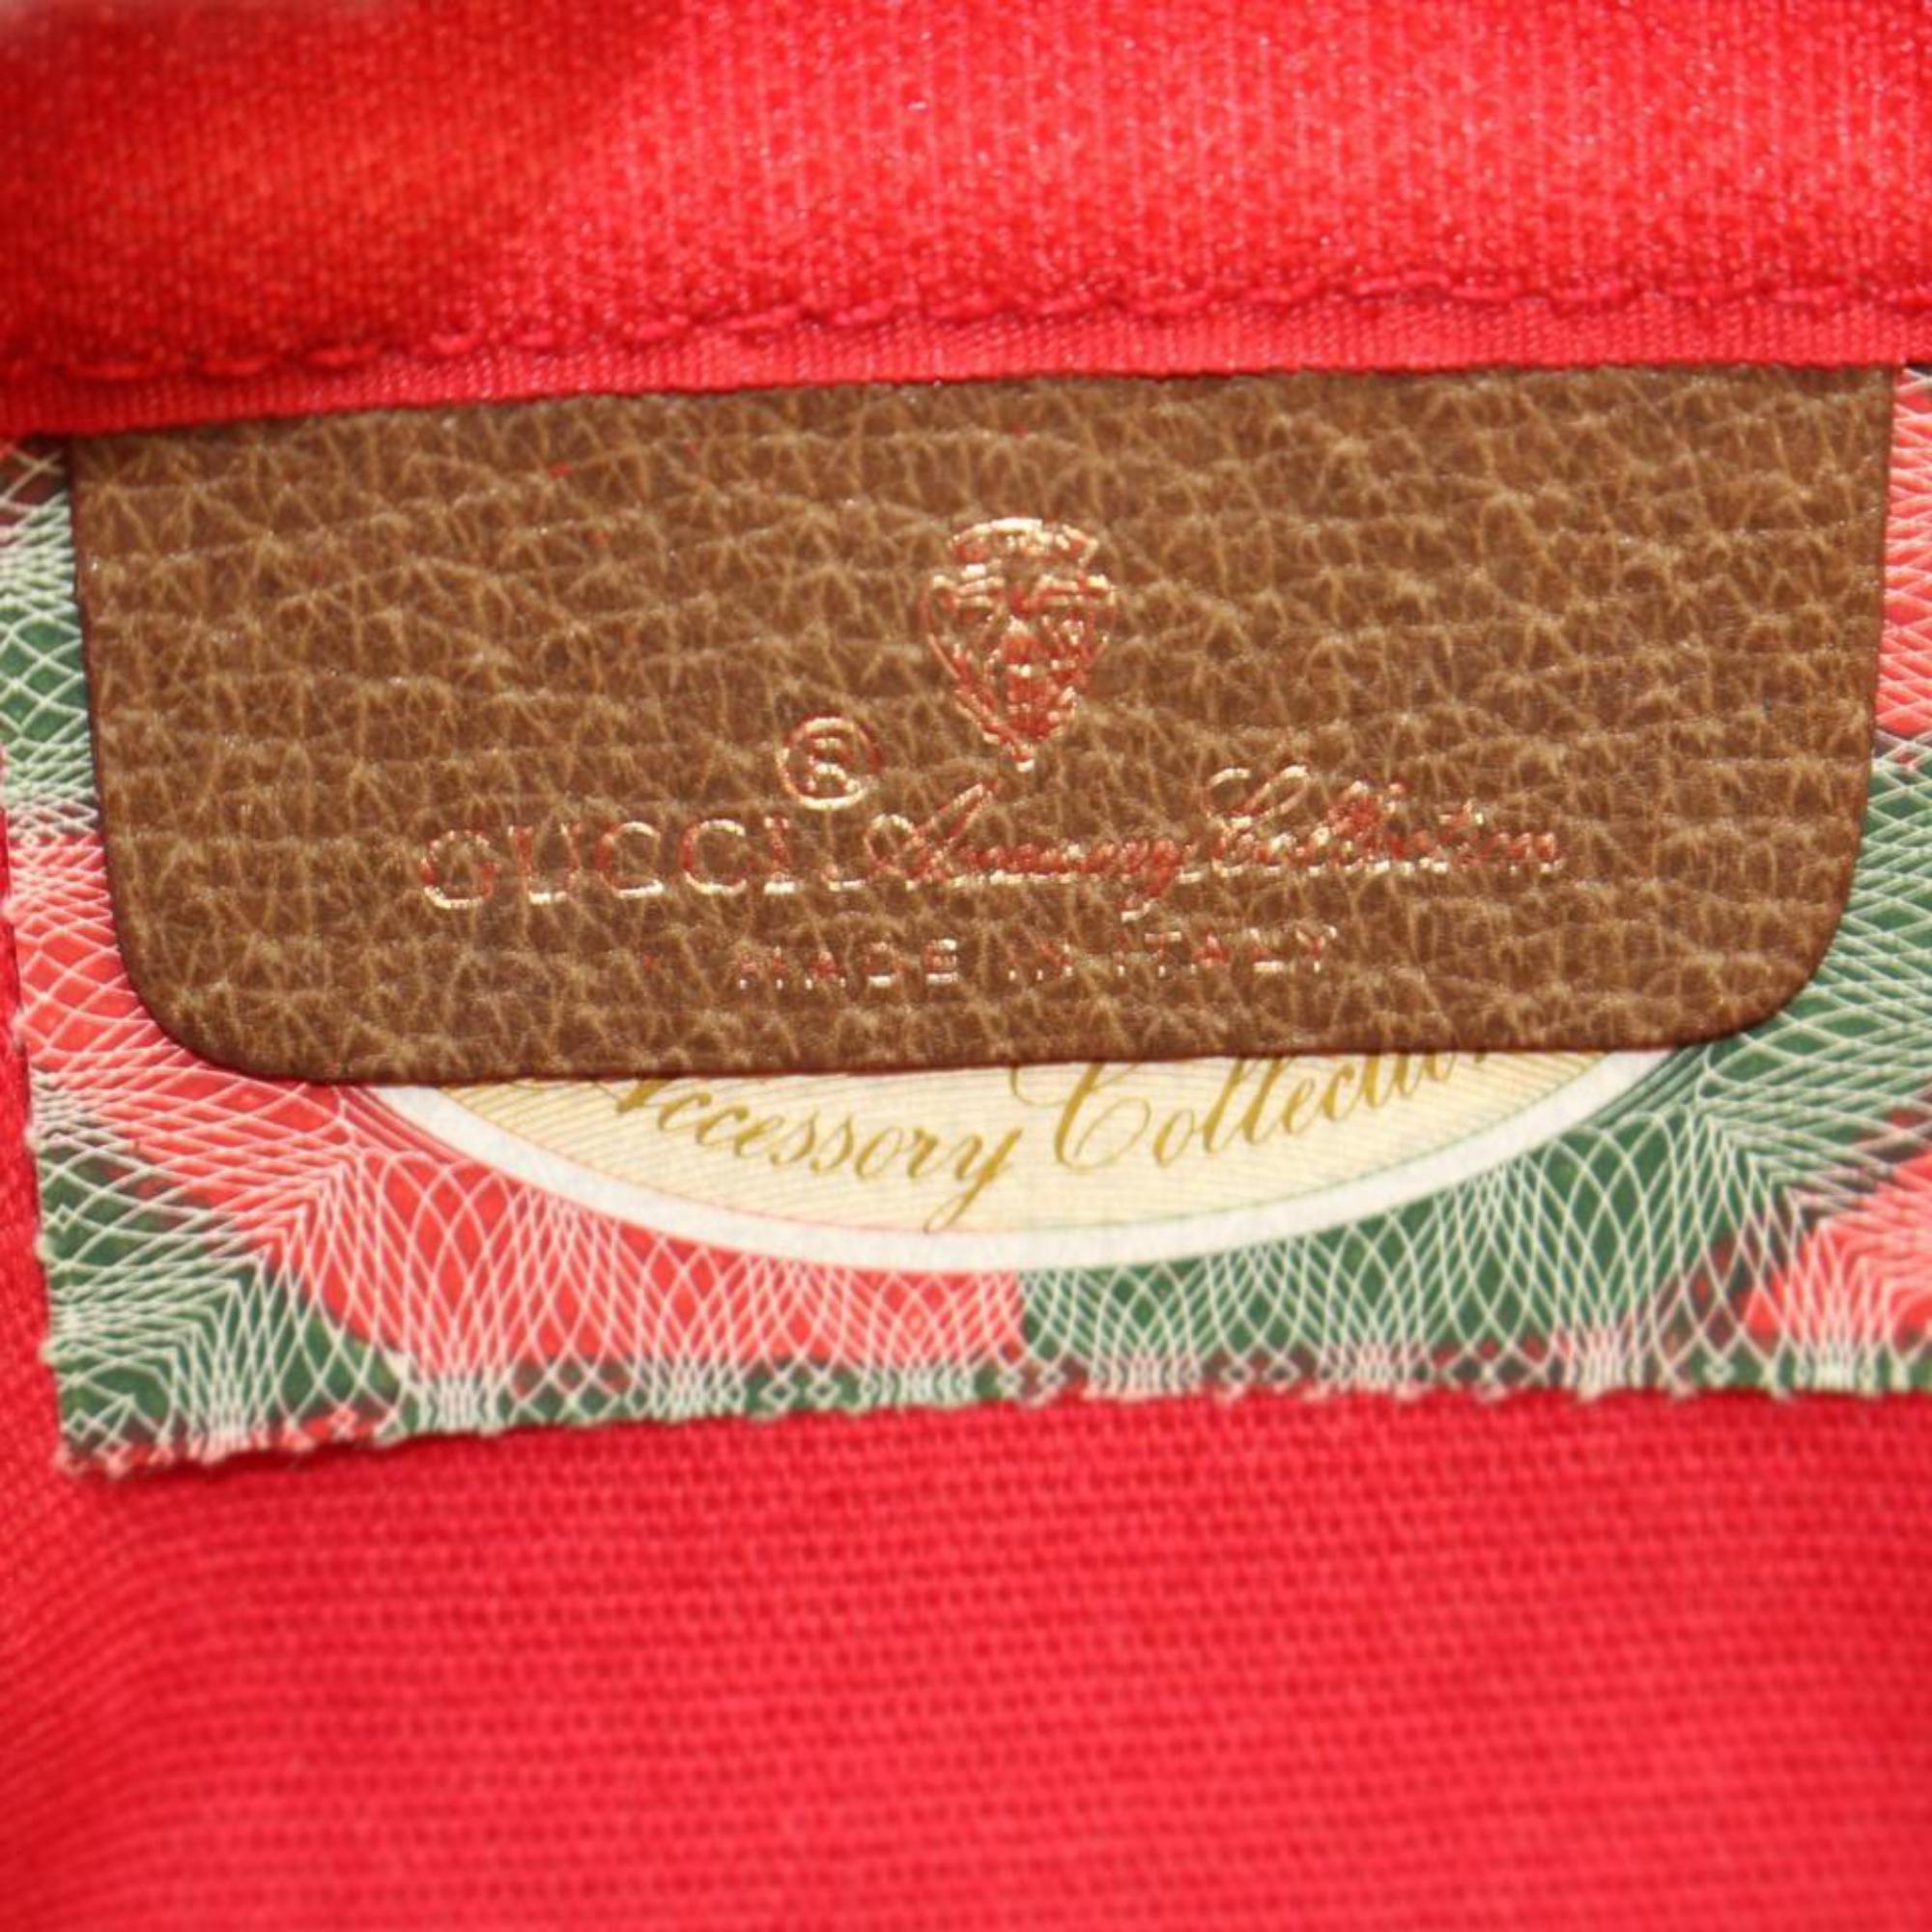 Gucci Red Signature Sherry Web Diagonal Strip Pouch 868079 Cosmetic Bag In Good Condition For Sale In Forest Hills, NY